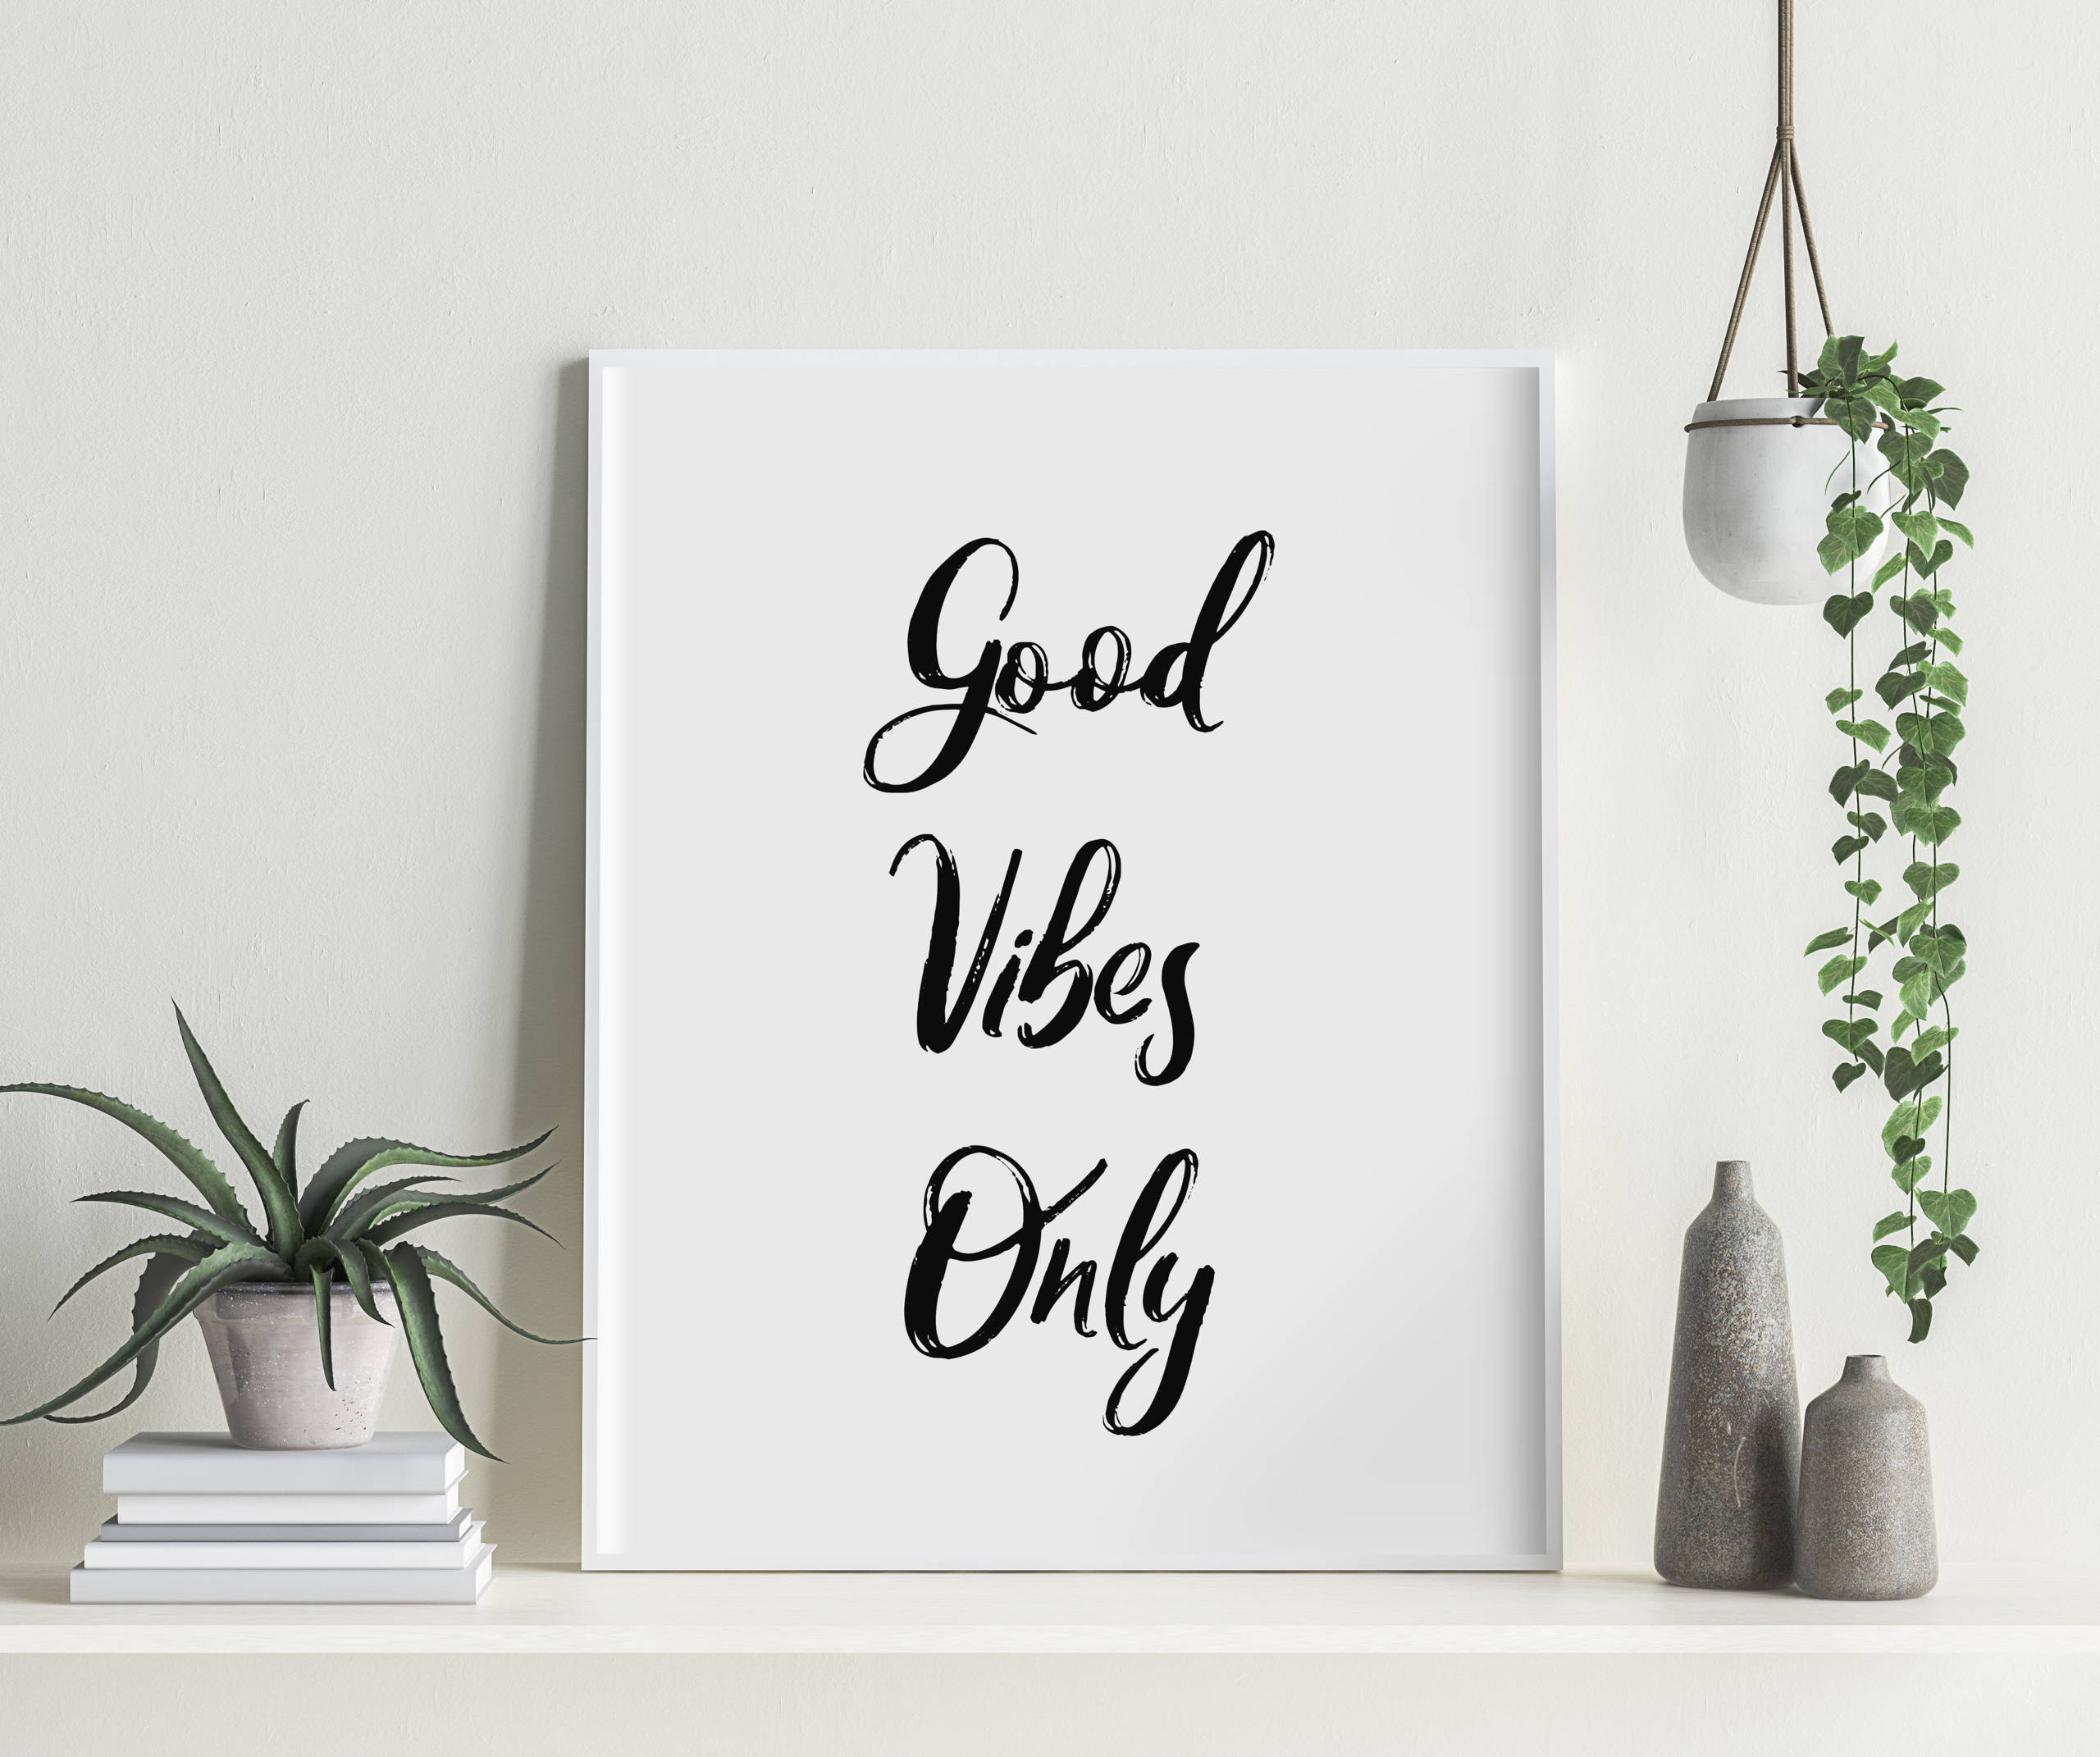 Shelf with decorations and ornaments, featuring a large typographical print with the text 'Good Vibes Only'